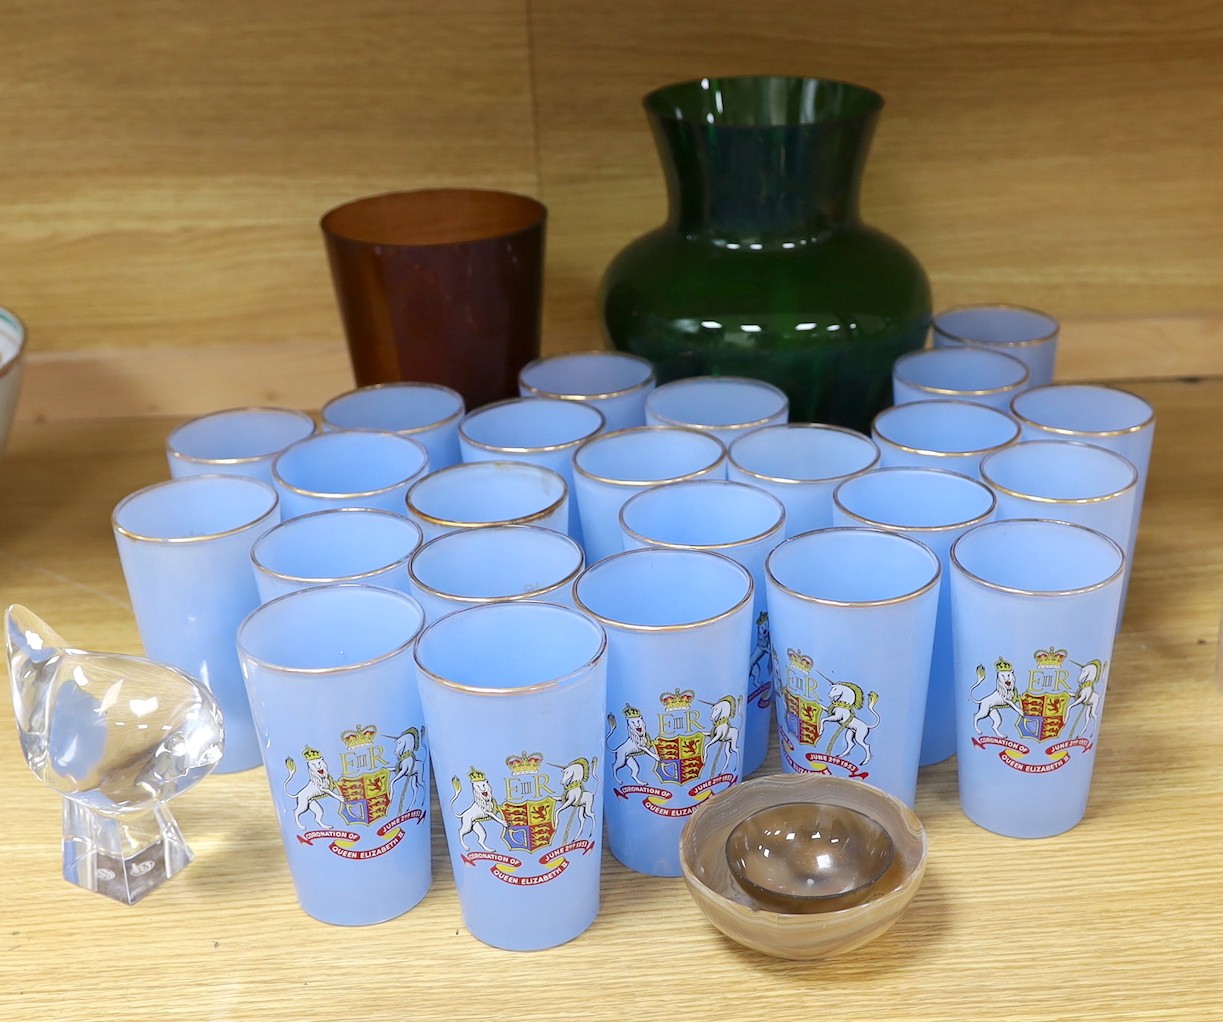 An assortment of twenty-four Coronation glasses in celebration of Queen Elizabeth II, together with other glassware and items to include a Baccarat model of a bird